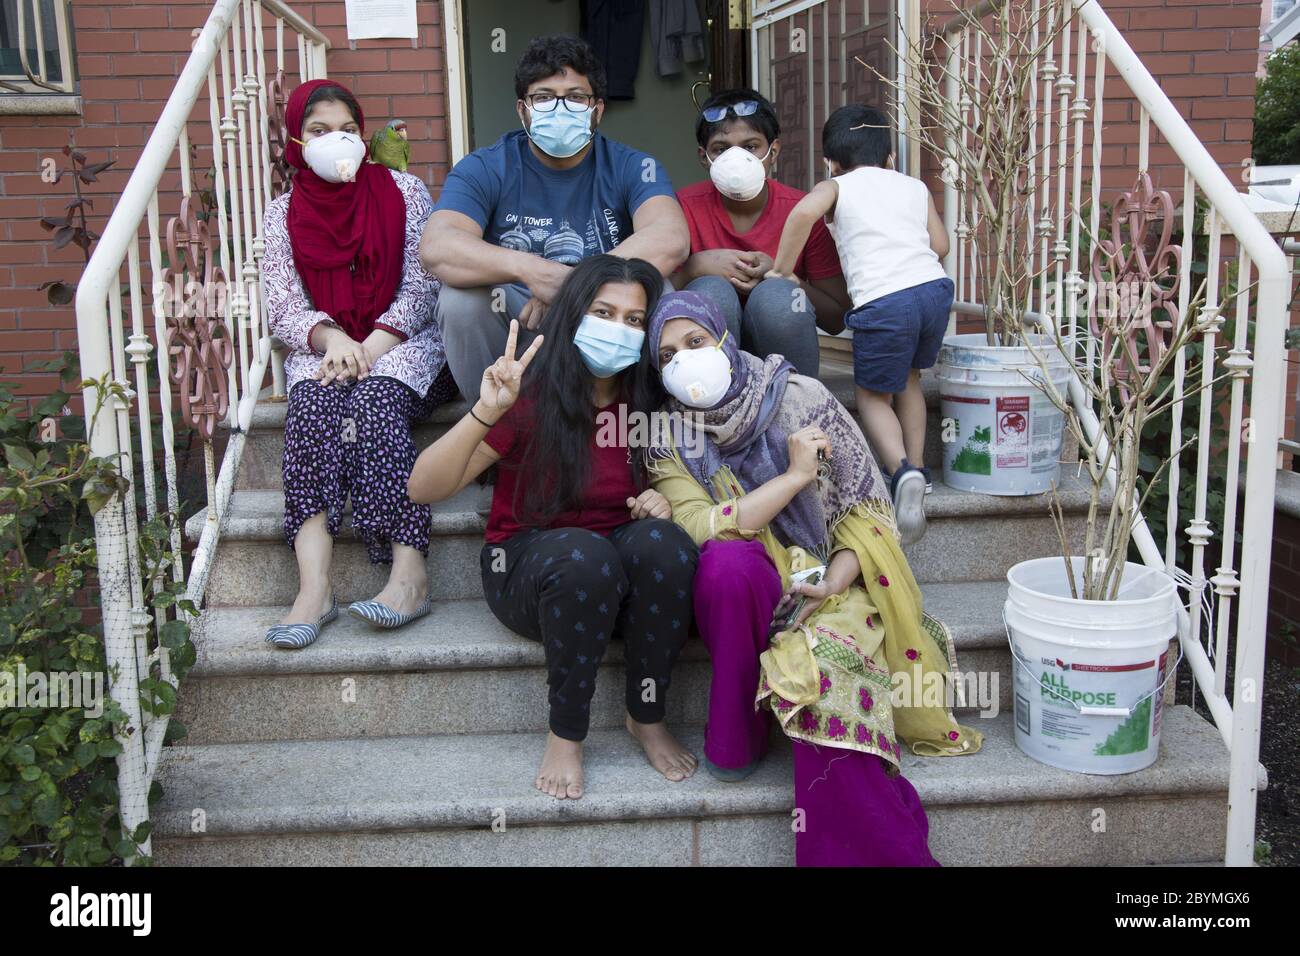 Bangladeshi Muslim family out on the front steps of their home during the Covid-19 pandemic during the holy month of Ramadan